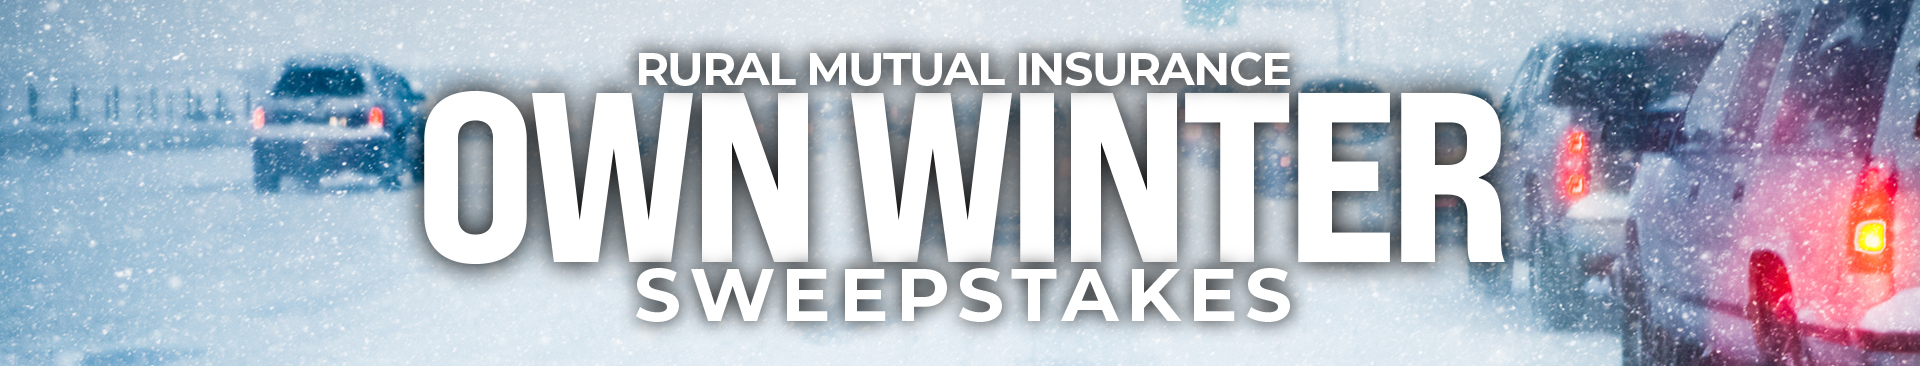 own winter sweepstakes banner